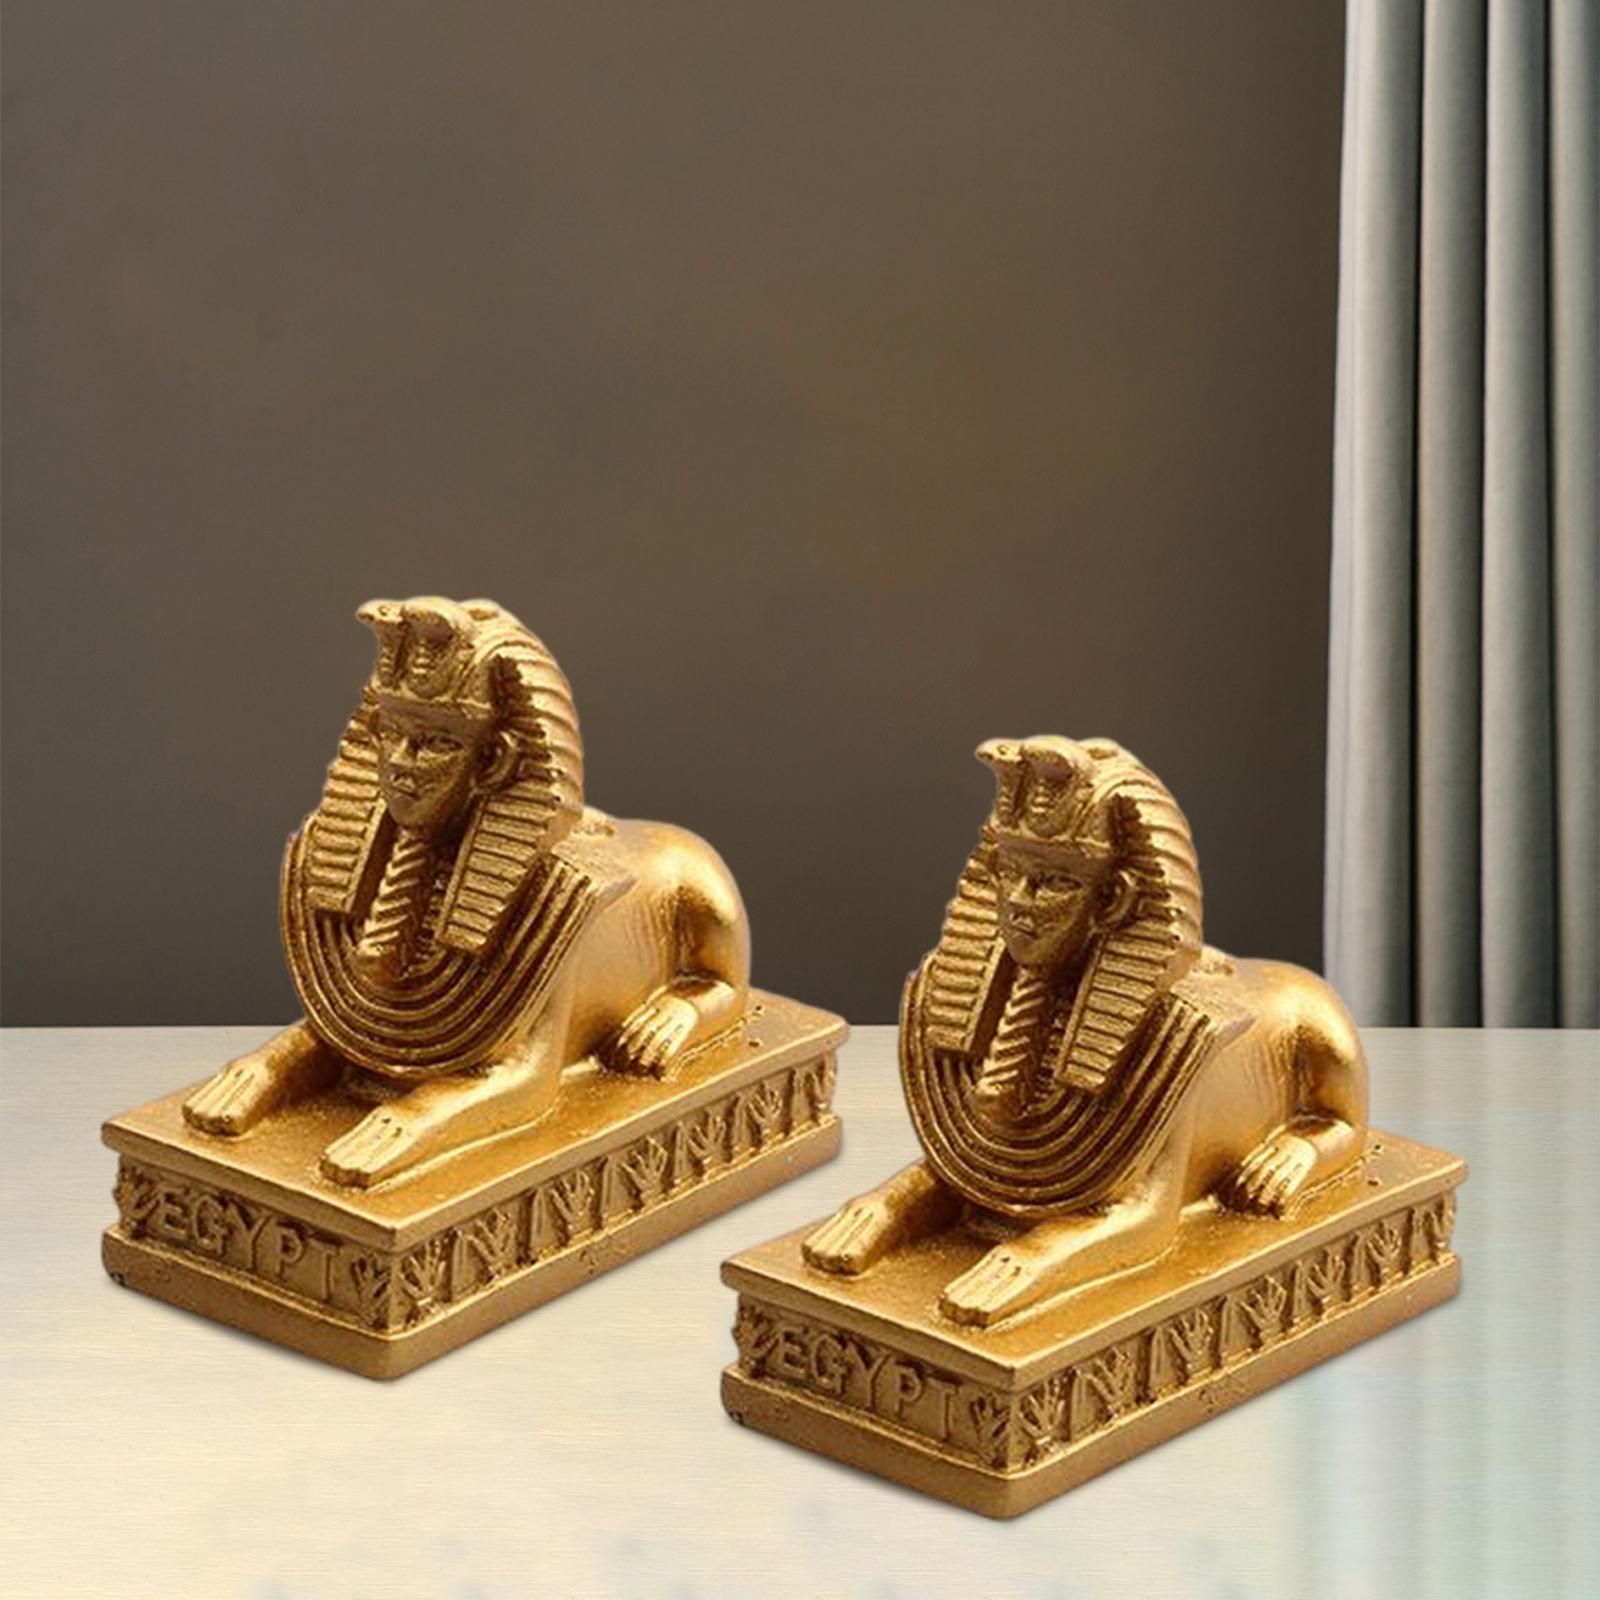 2Pcs Sphinx Statues Sculpture Egyptian Figurines Pharaoh Decor Home Office